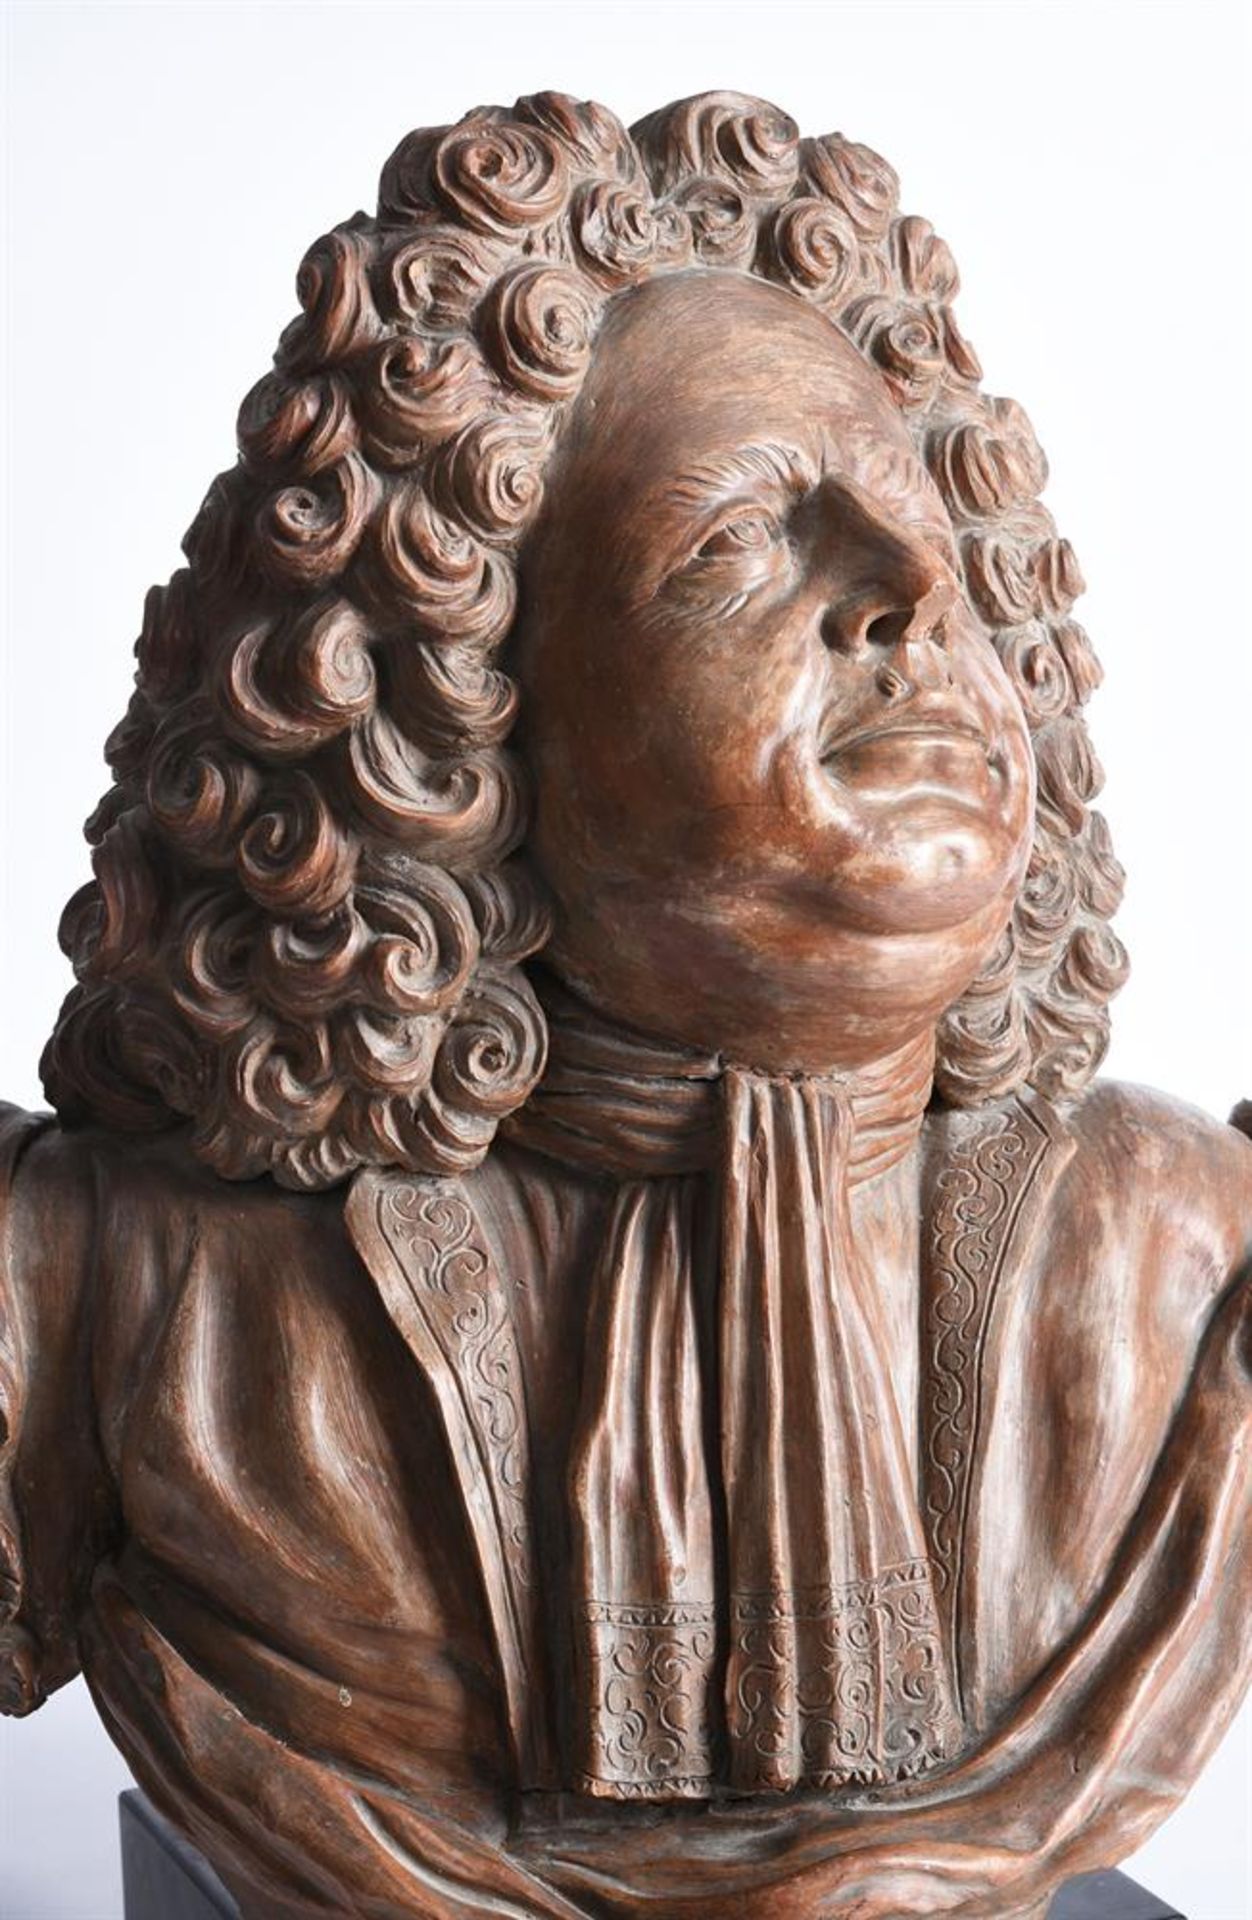 A TERRACOTTA BUST OF A NOBLEMAN, FRENCH OR ENGLISH, POSSIBLY EARLY 18TH CENTURY - Image 3 of 5